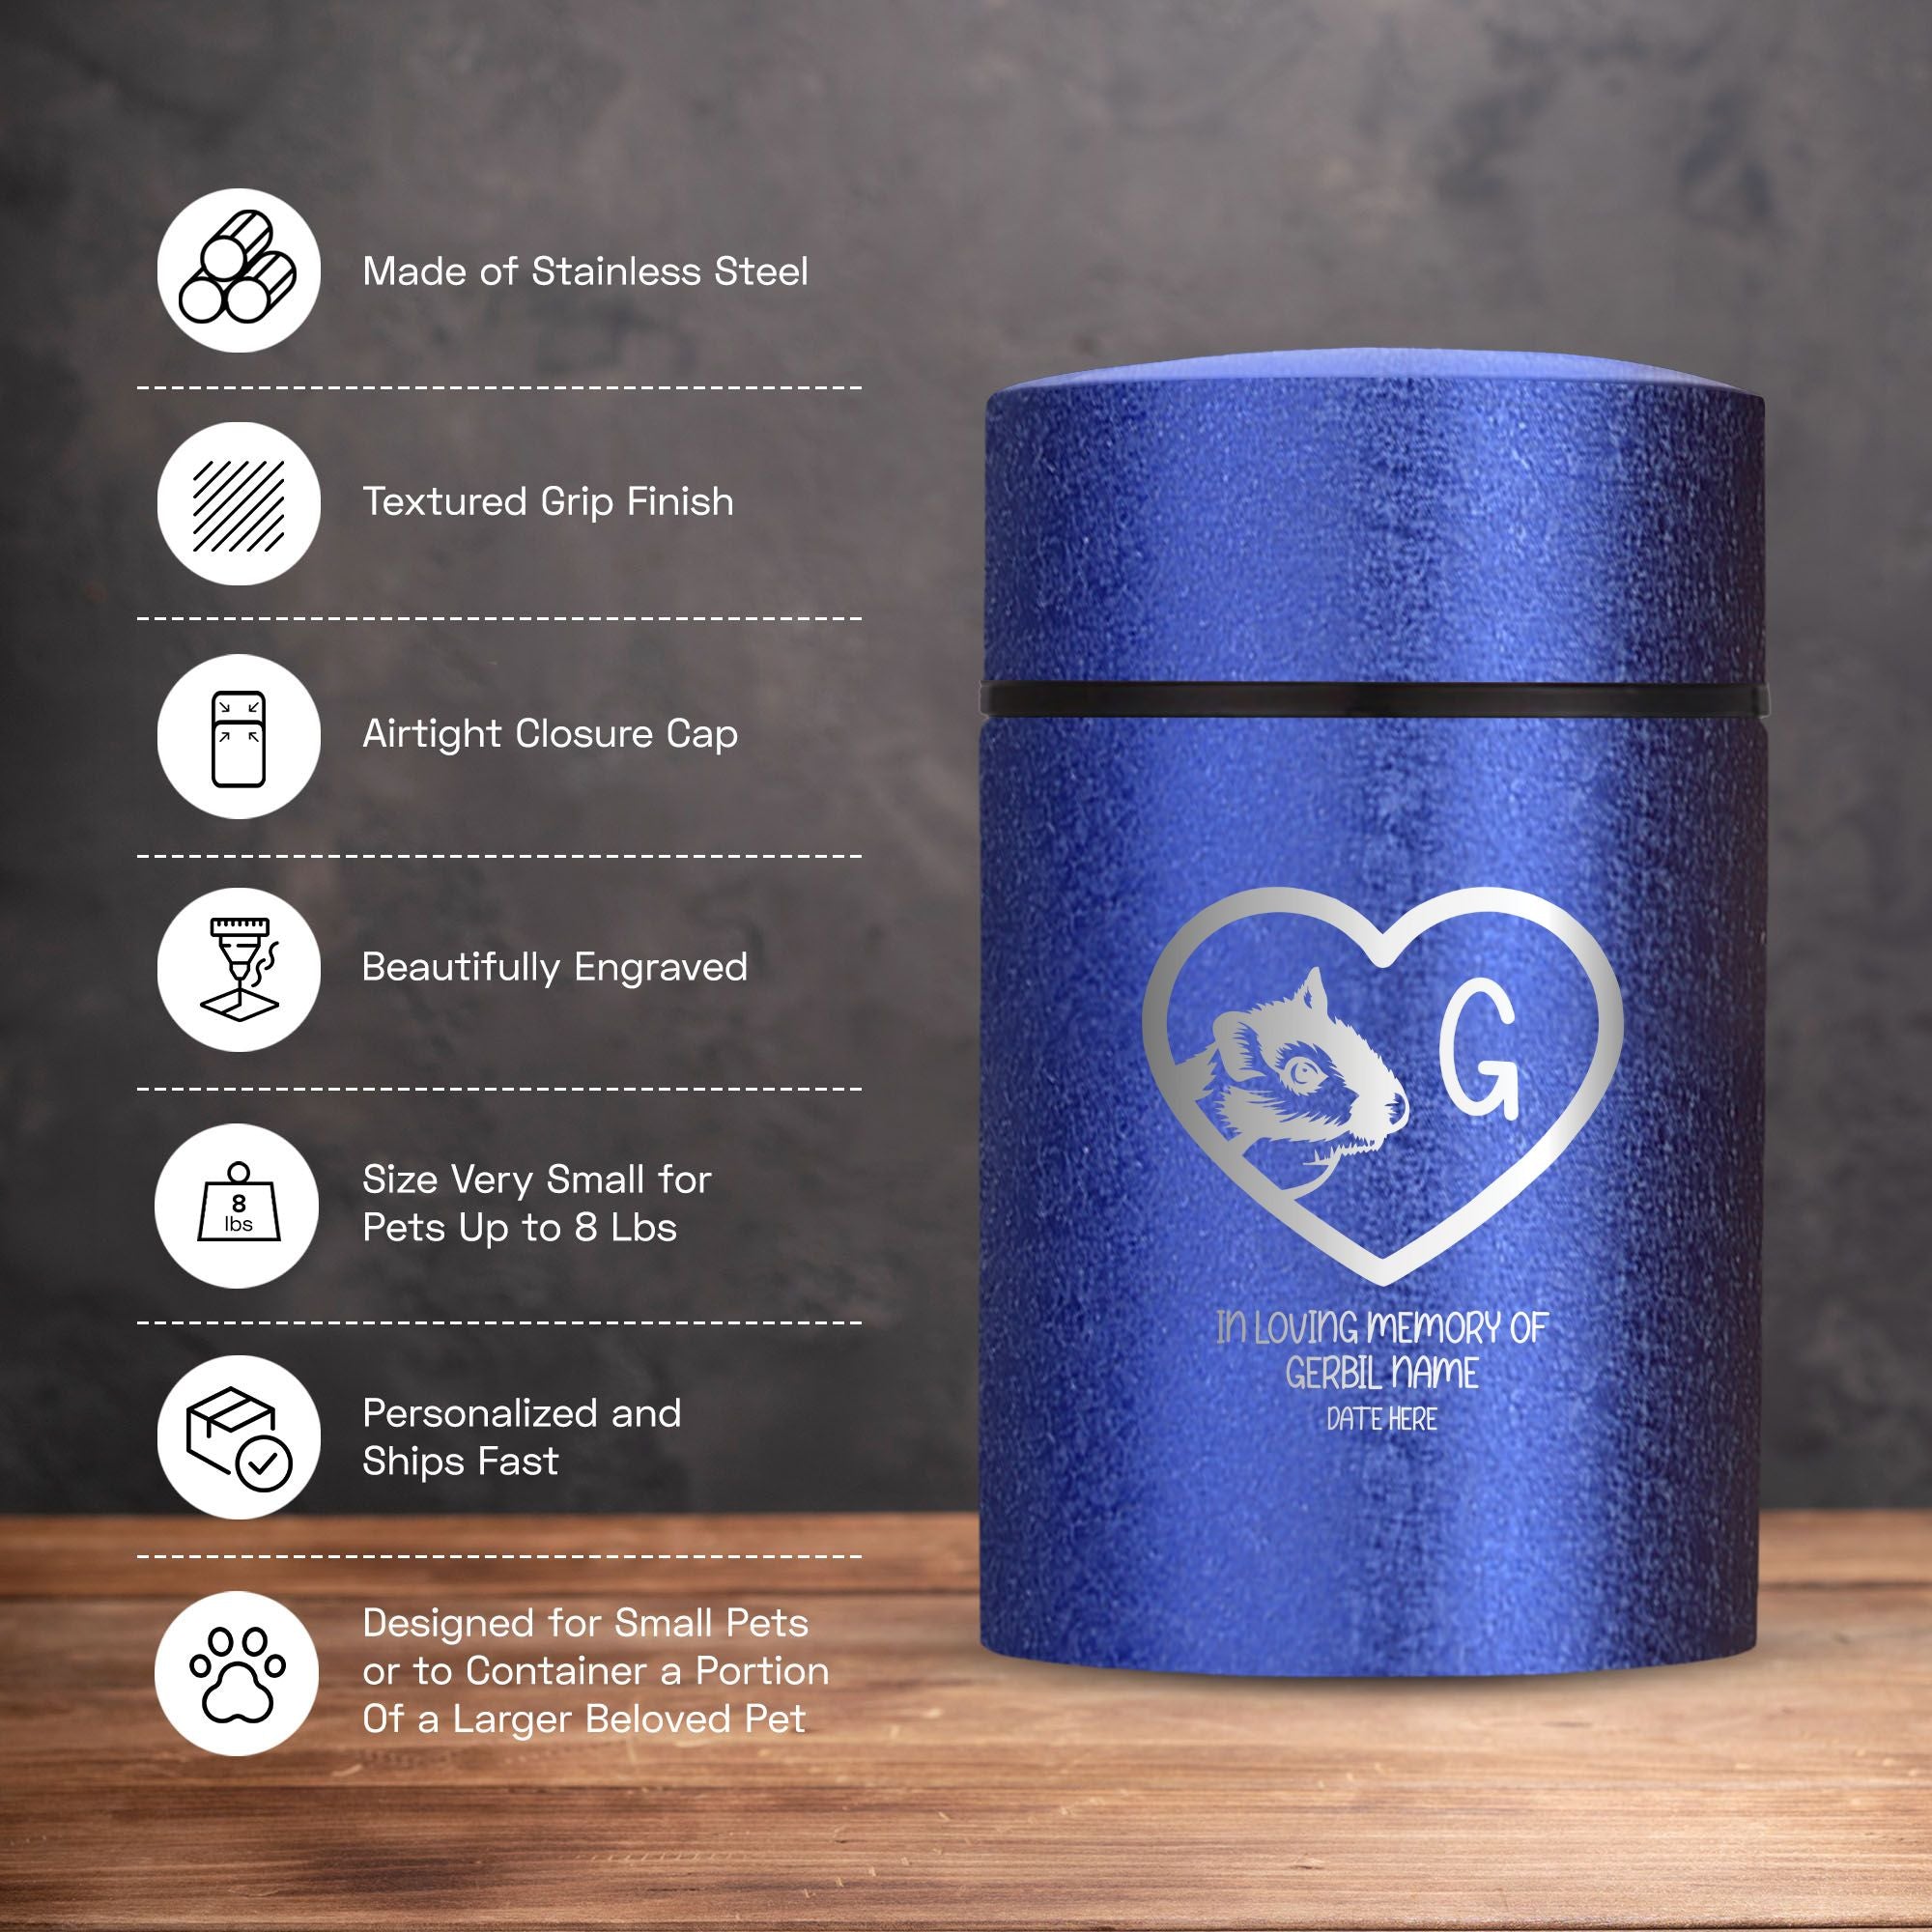 Products Personalized Custom Compact Mini Urn Keepsake Textured Pet Cremation Urn - Engraved Powder Coat Steel Urn for Gerbil Memorial Ashes | 3.2" x 2" (4-8 lb Capacity)